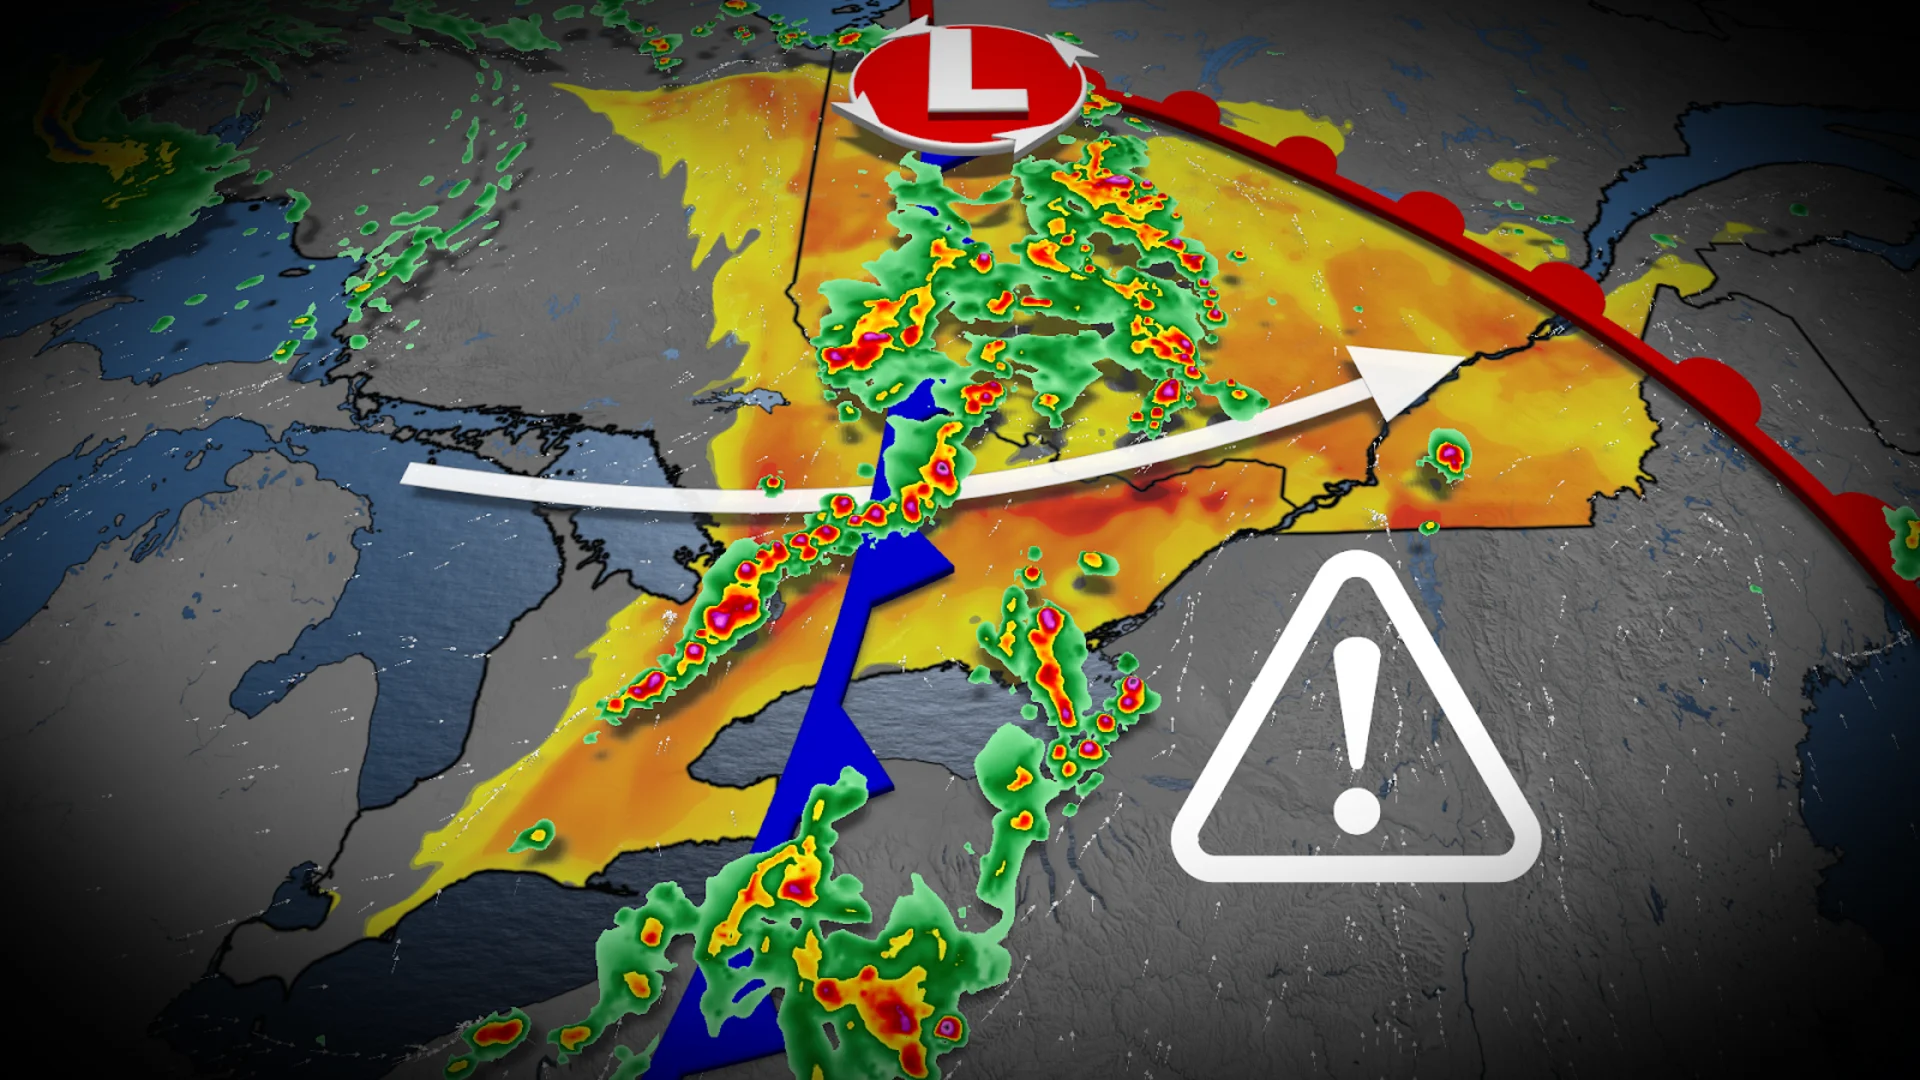 Multi-day severe thunderstorm threat targets parts of Ontario. See the risk areas, and timing, here